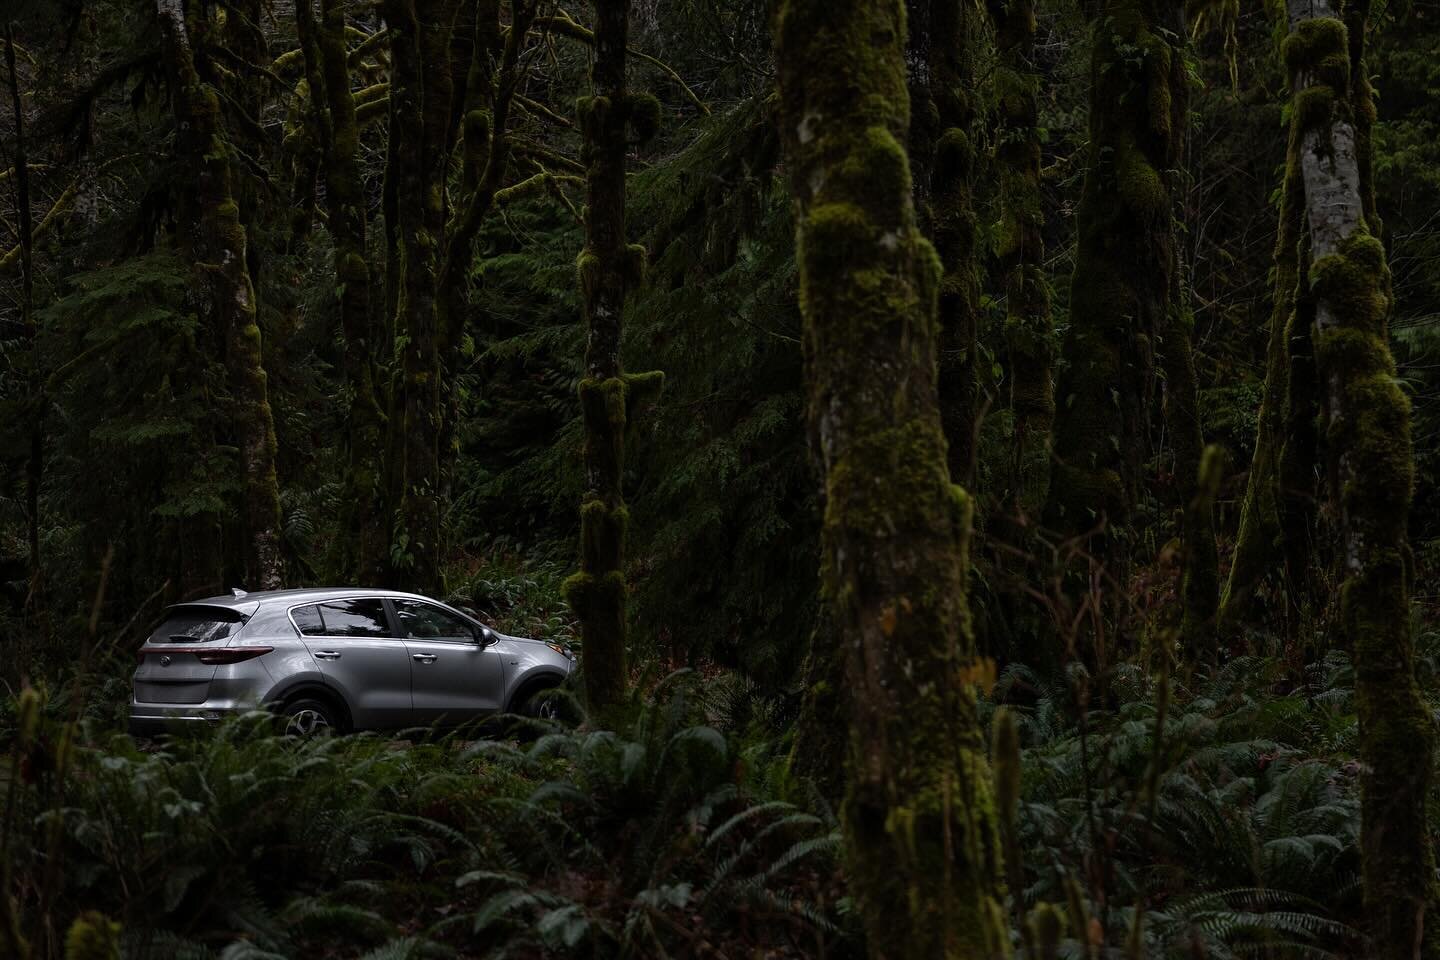 When you&rsquo;re deep in the woods and don&rsquo;t have a subject to shoot, you shoot your rental car. Or logging road traffic.